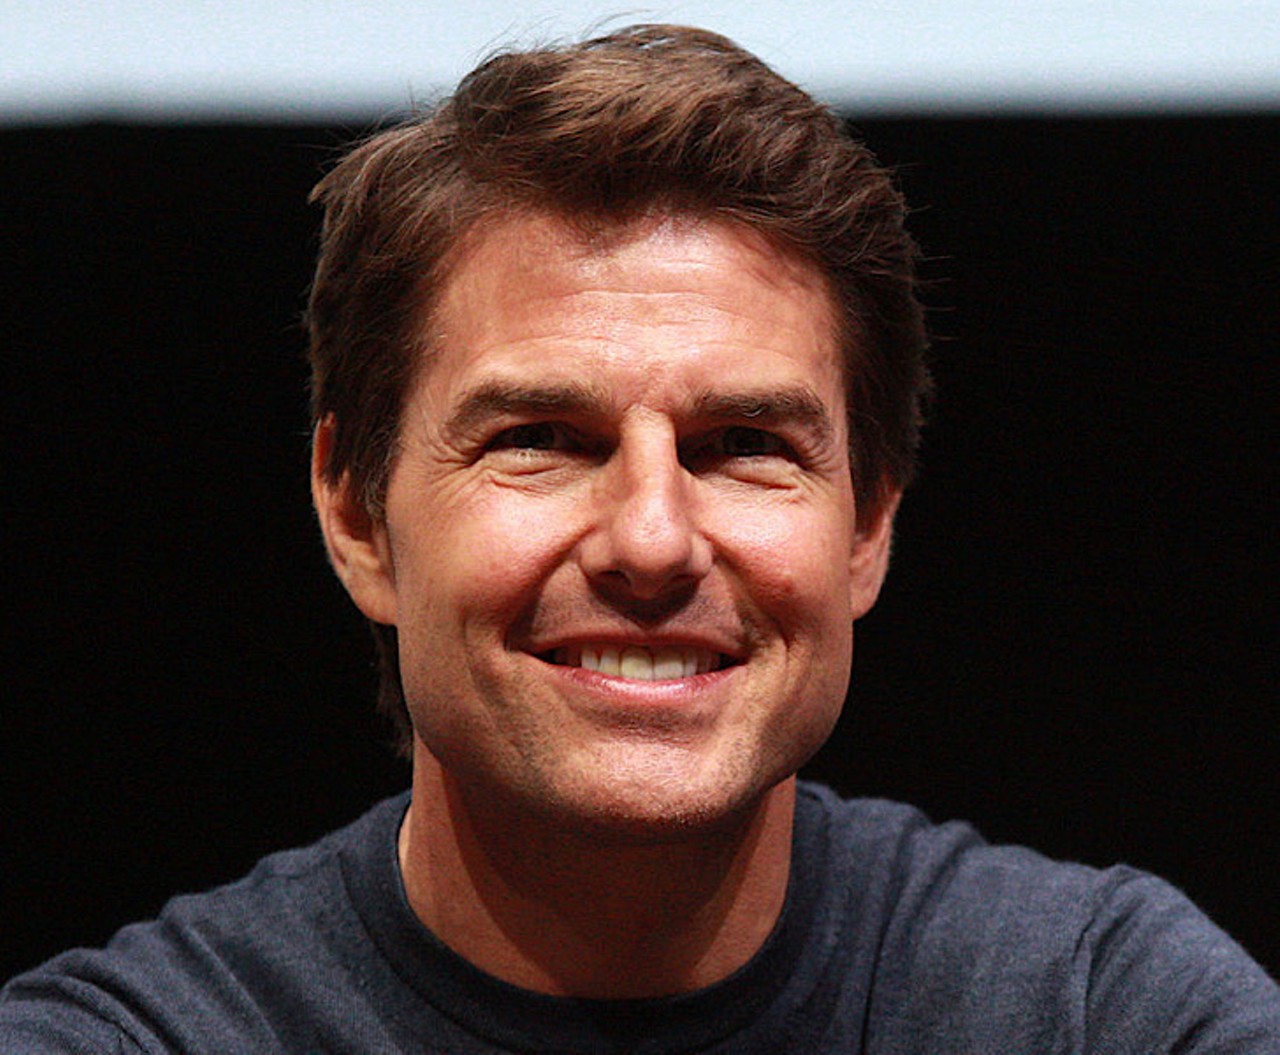 Tom Cruise
&#147;Jerry Maguire&#148; star and known Scientologist Tom Cruise owns a penthouse in Clearwater near the Scientology Headquarters in the downtown area. Cruise is also known for his roles in the Mission Impossible movies. 
Photo Gage Skidmore via Wikimedia Commons